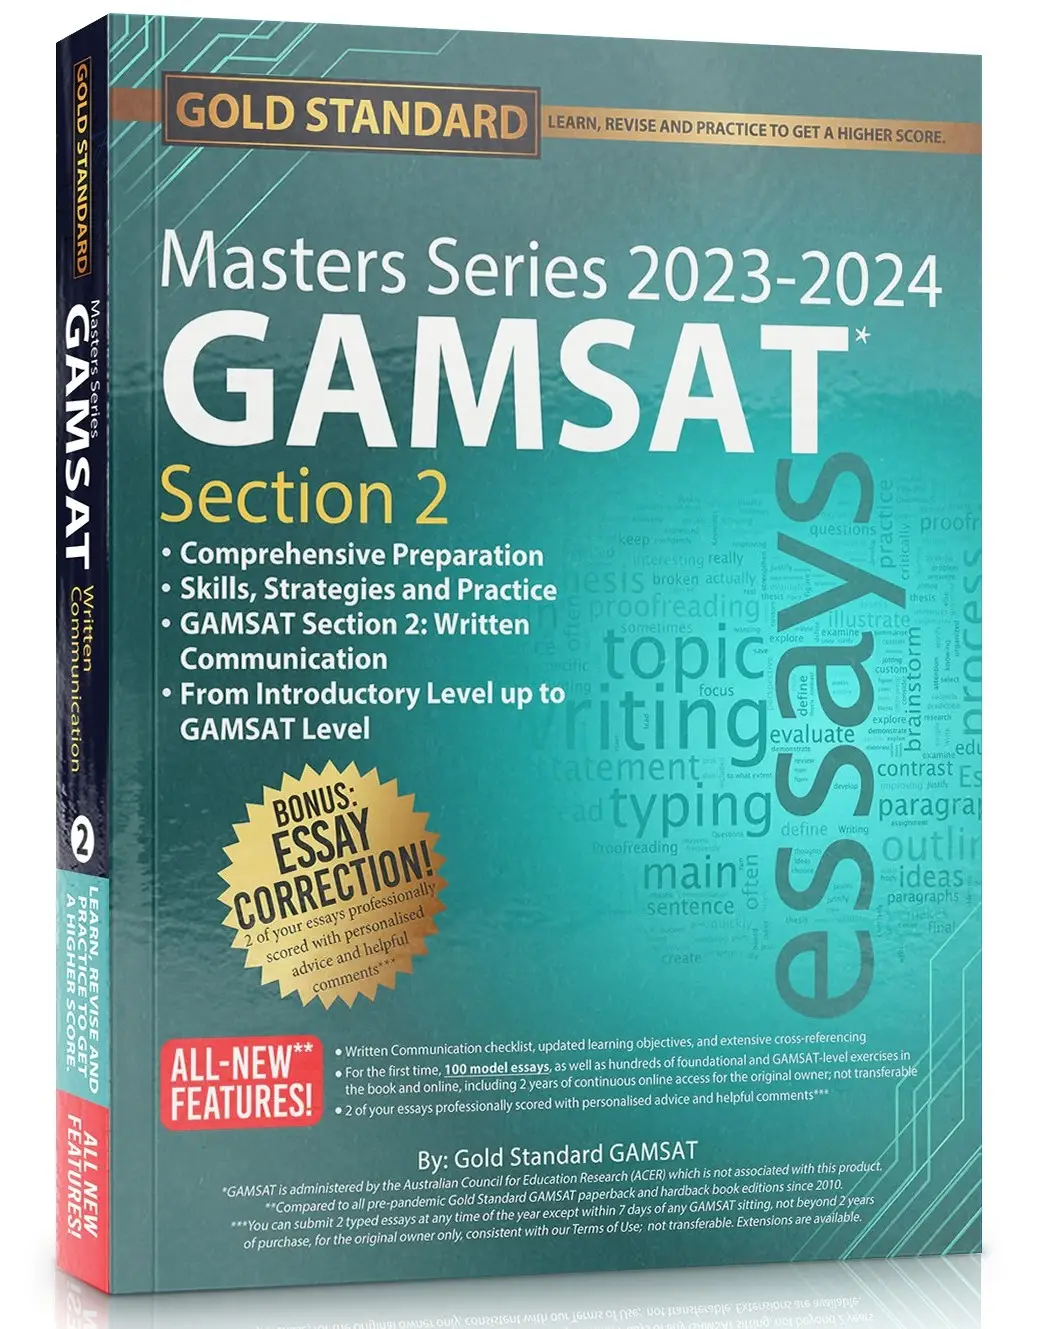 2023-2024 GAMSAT Masters Series Section 2